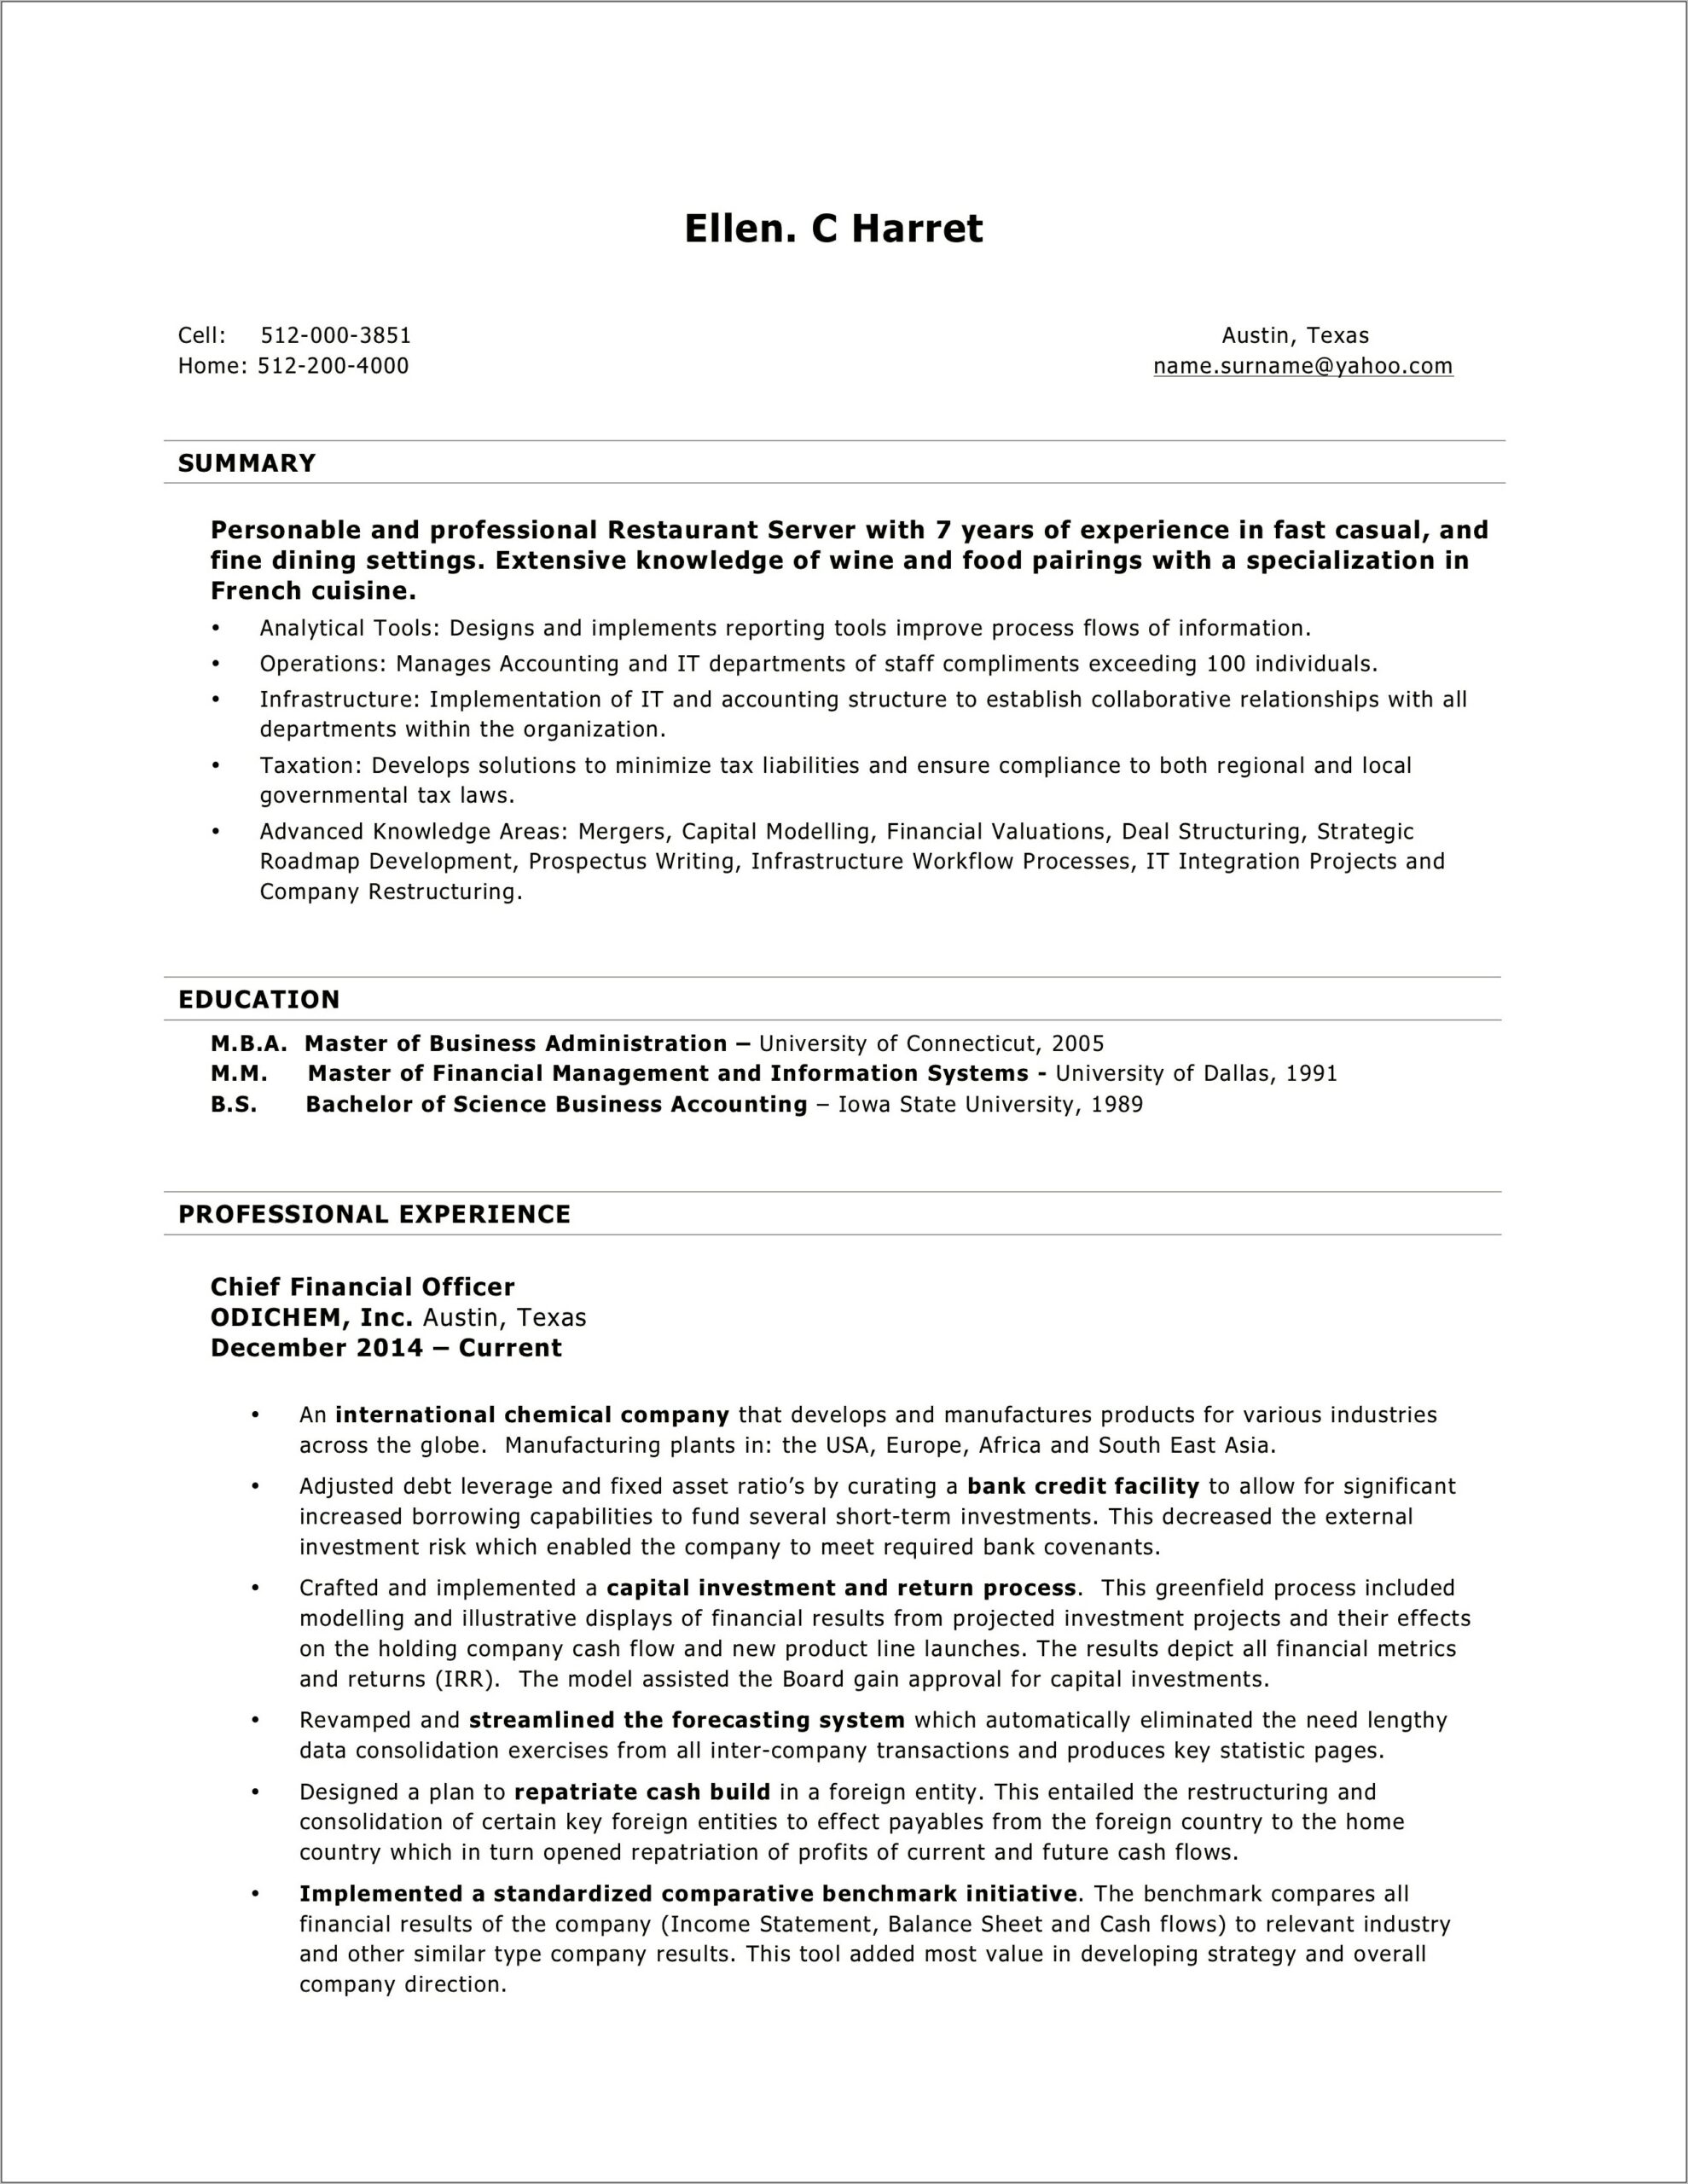 Free Creative Resume Template Doc Free Download